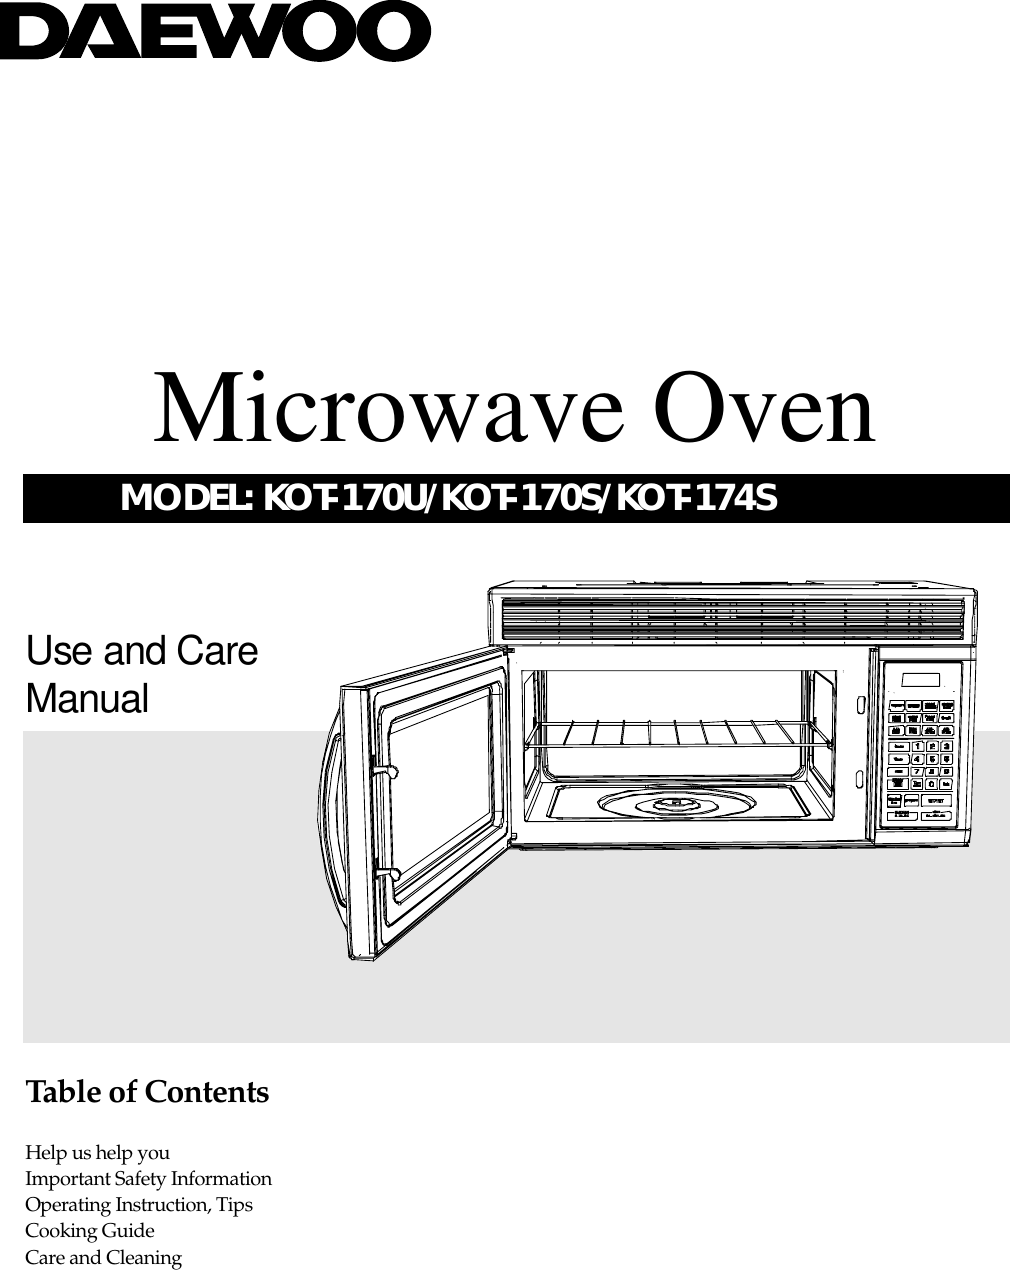 Use and CareManualTable of ContentsHelp us help youImportant Safety InformationOperating Instruction, TipsCooking GuideCare and CleaningMicrowave OvenMODEL: KOT-170U/KOT-170S/KOT-174S